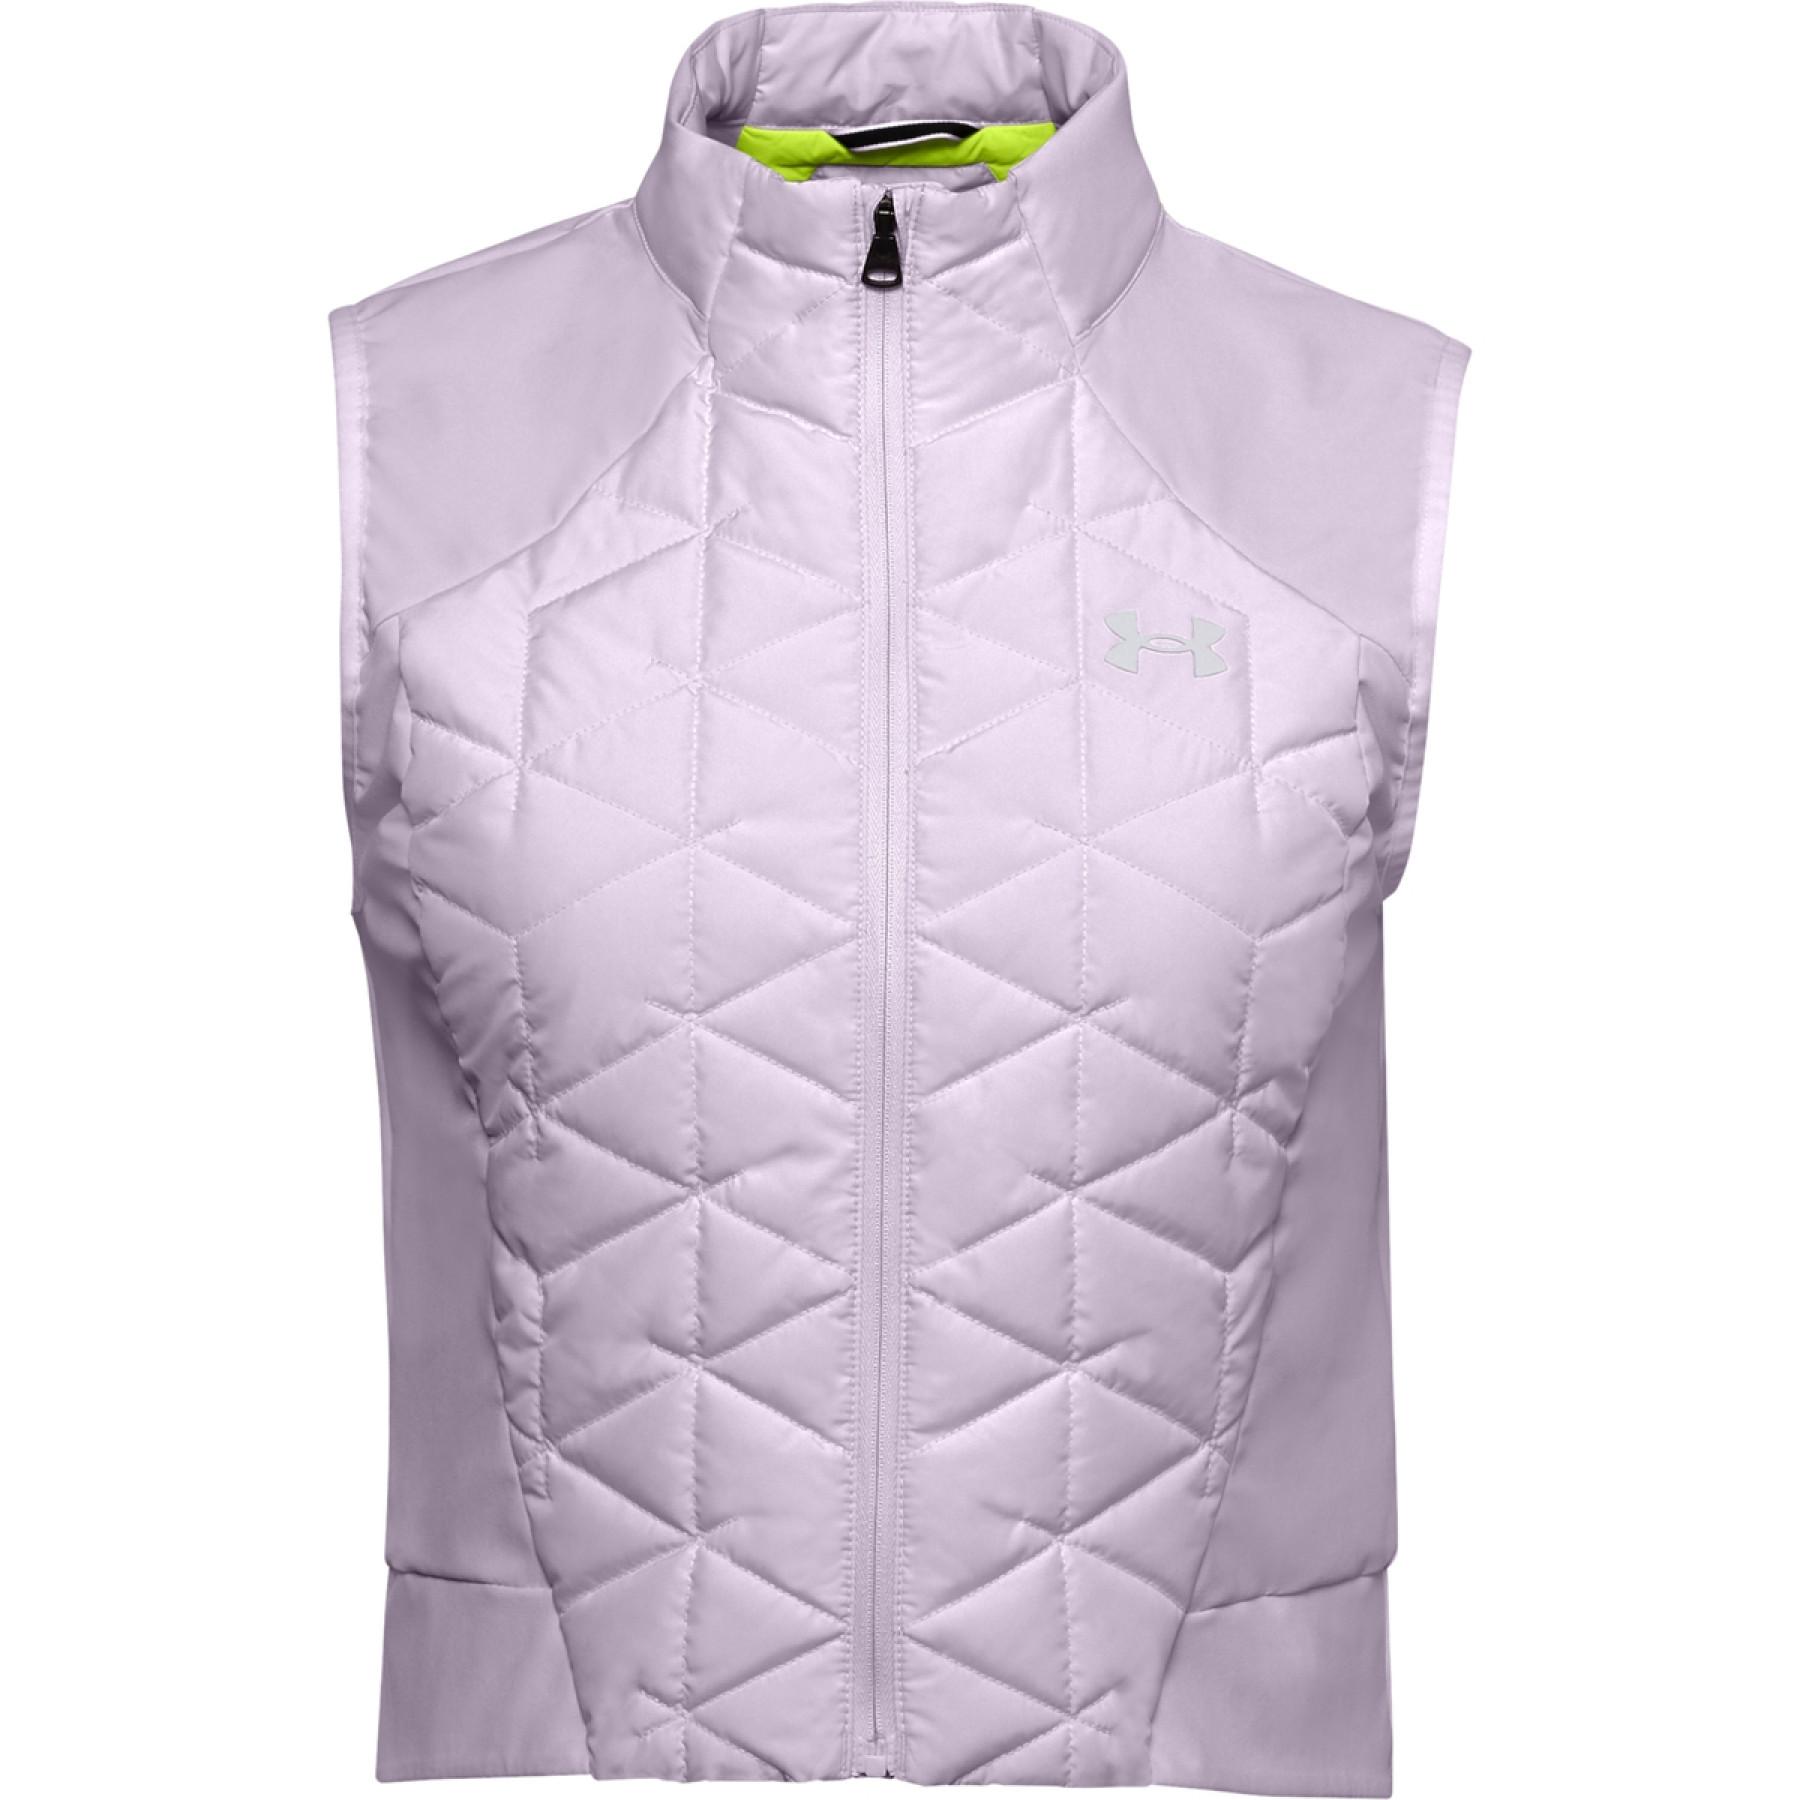 Women's jacket Under Armour sans manches ColdGear Reactor Run - Jackets and  tracksuits - Women's volleyball wear - Volleyball wear